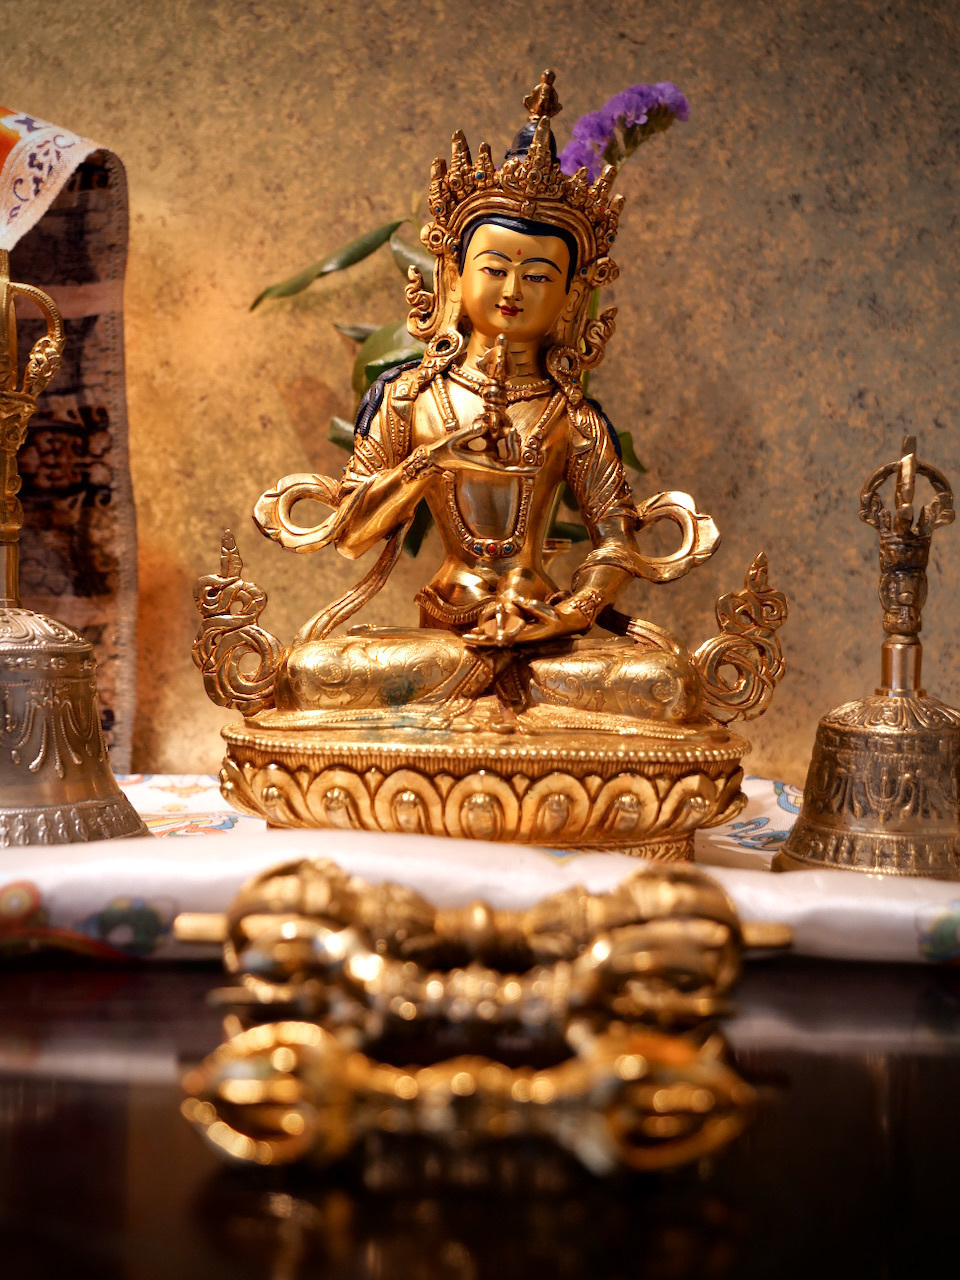 Small Tibetan Buddhist statue with three vajra sitting in front of the statue